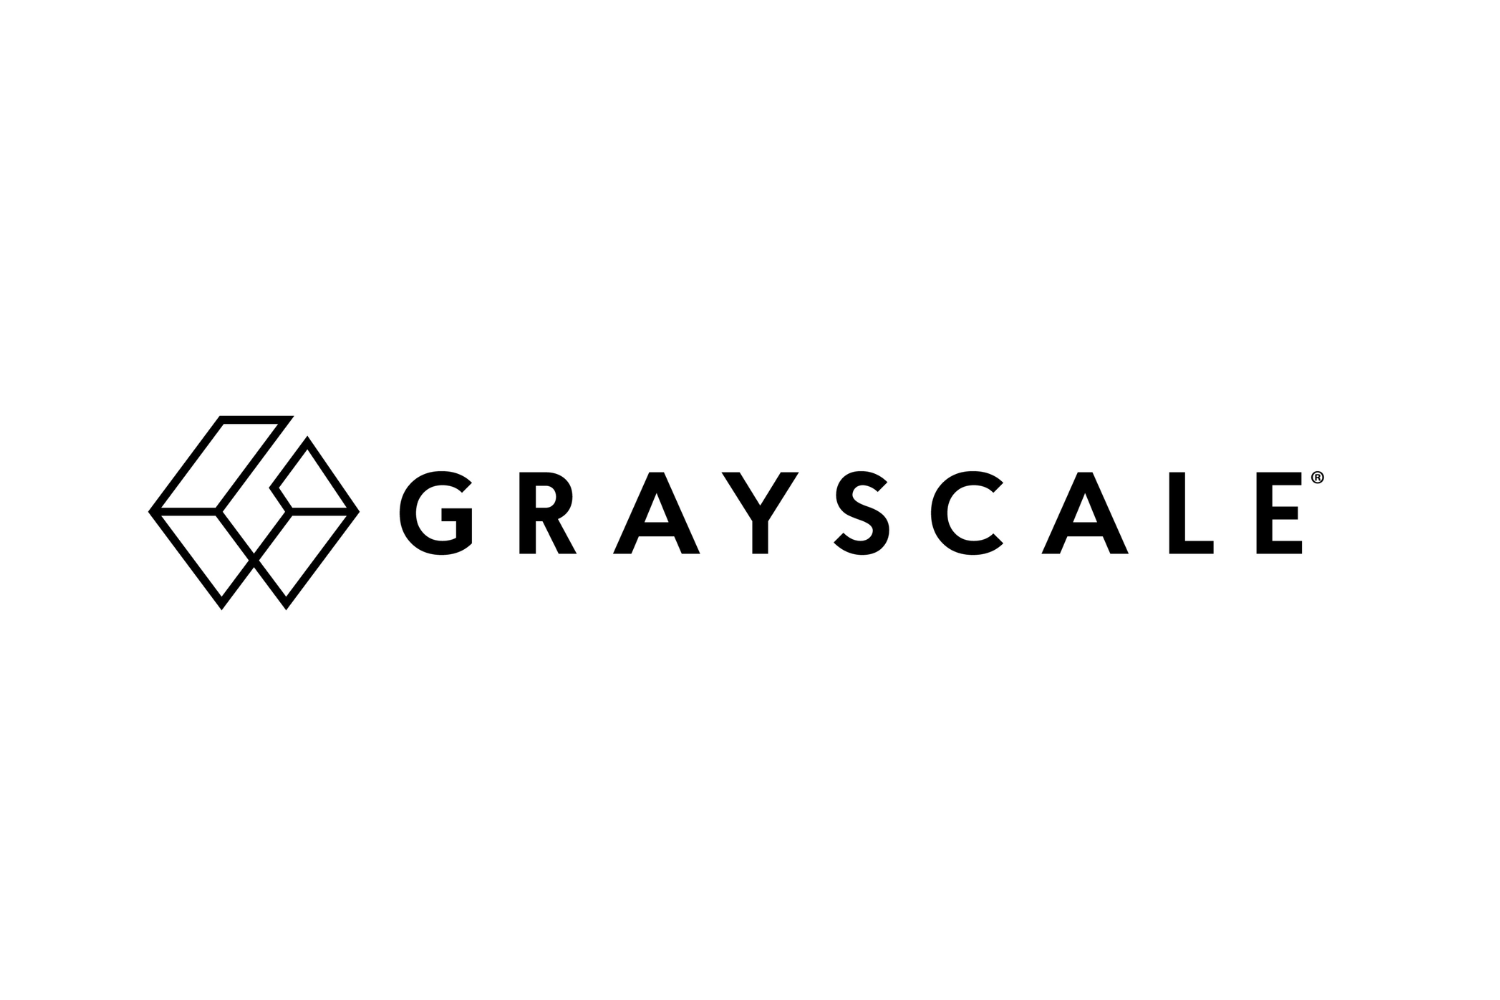 Grayscale would appeal lawsuit against SEC if court rejects case, CEO says